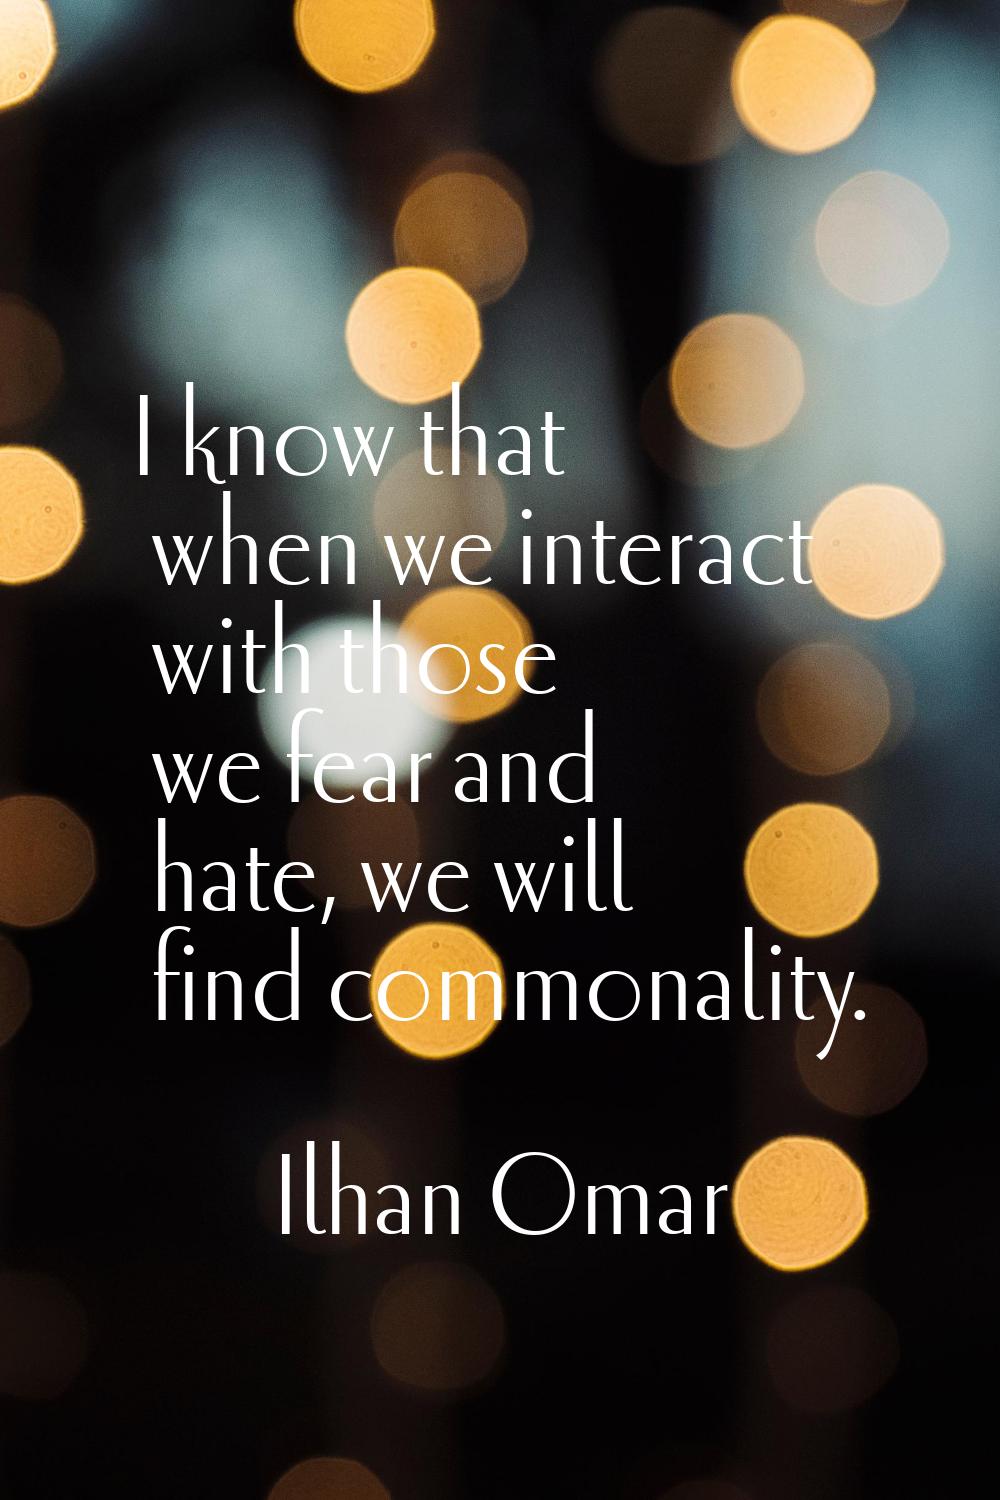 I know that when we interact with those we fear and hate, we will find commonality.